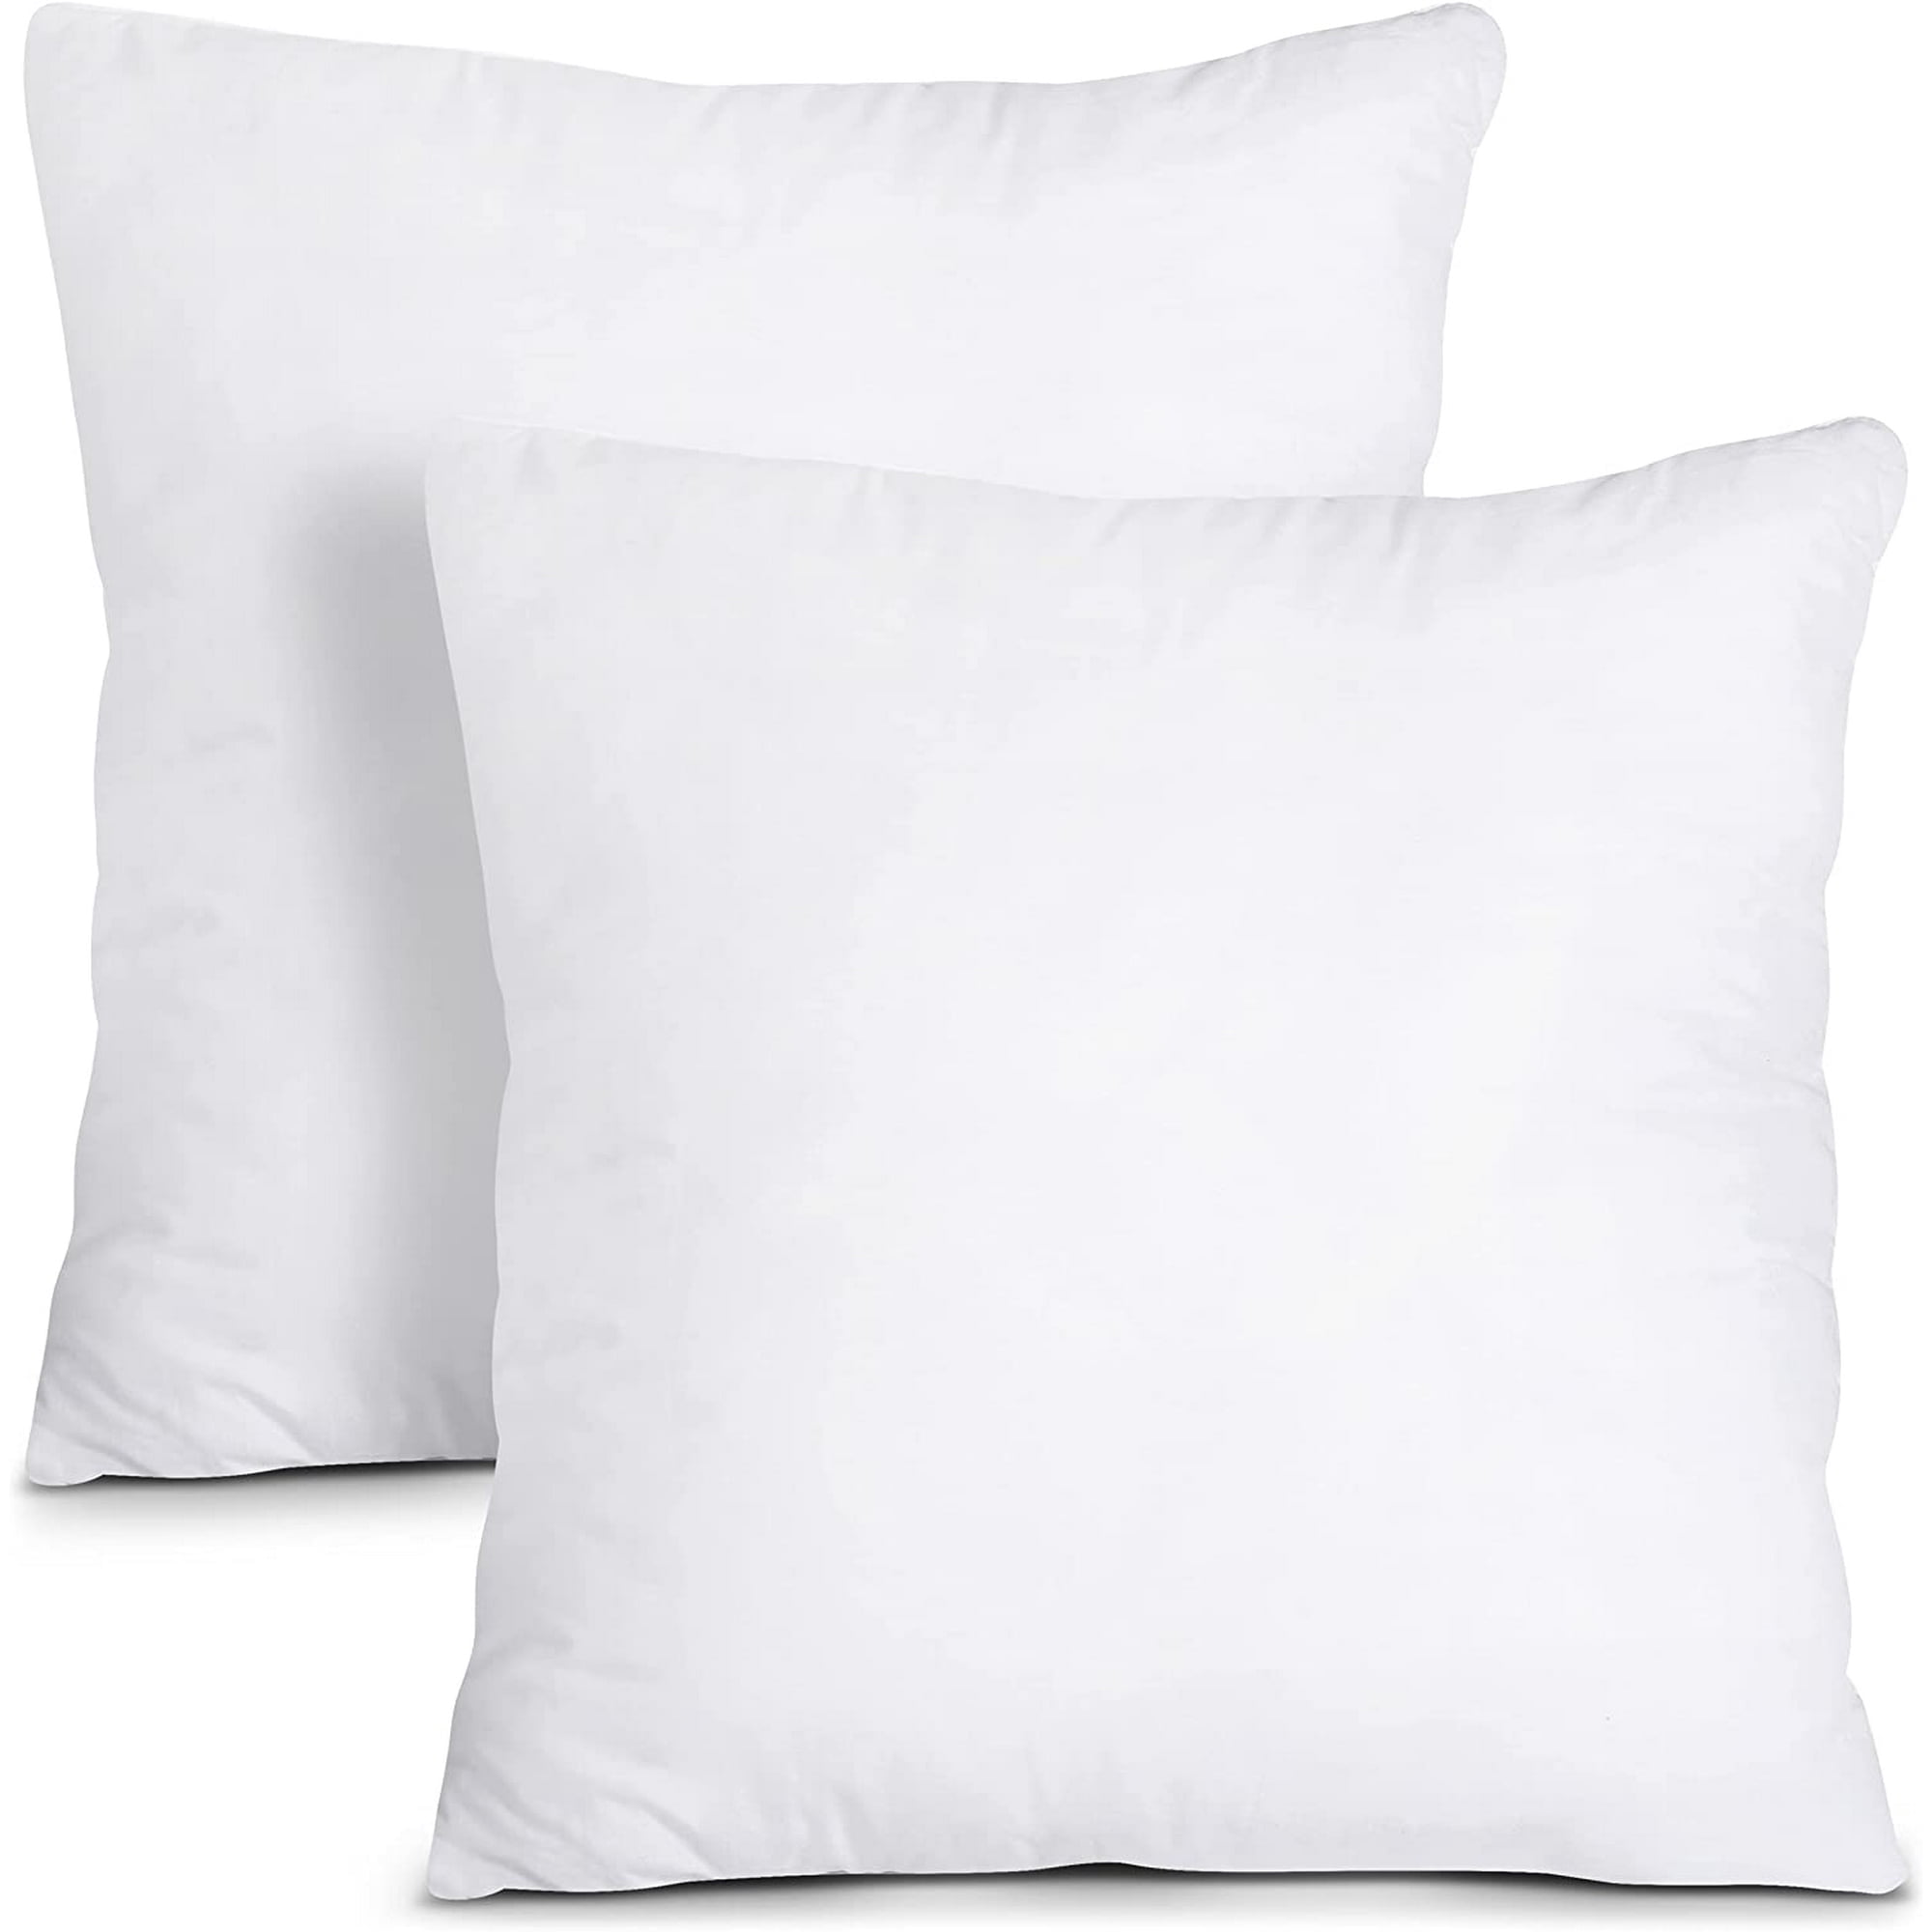 White , 18 x 18-2 Pack)home Comfortable Throw Pillow Insert Support,Plus  Zipper Removable Cover - AliExpress